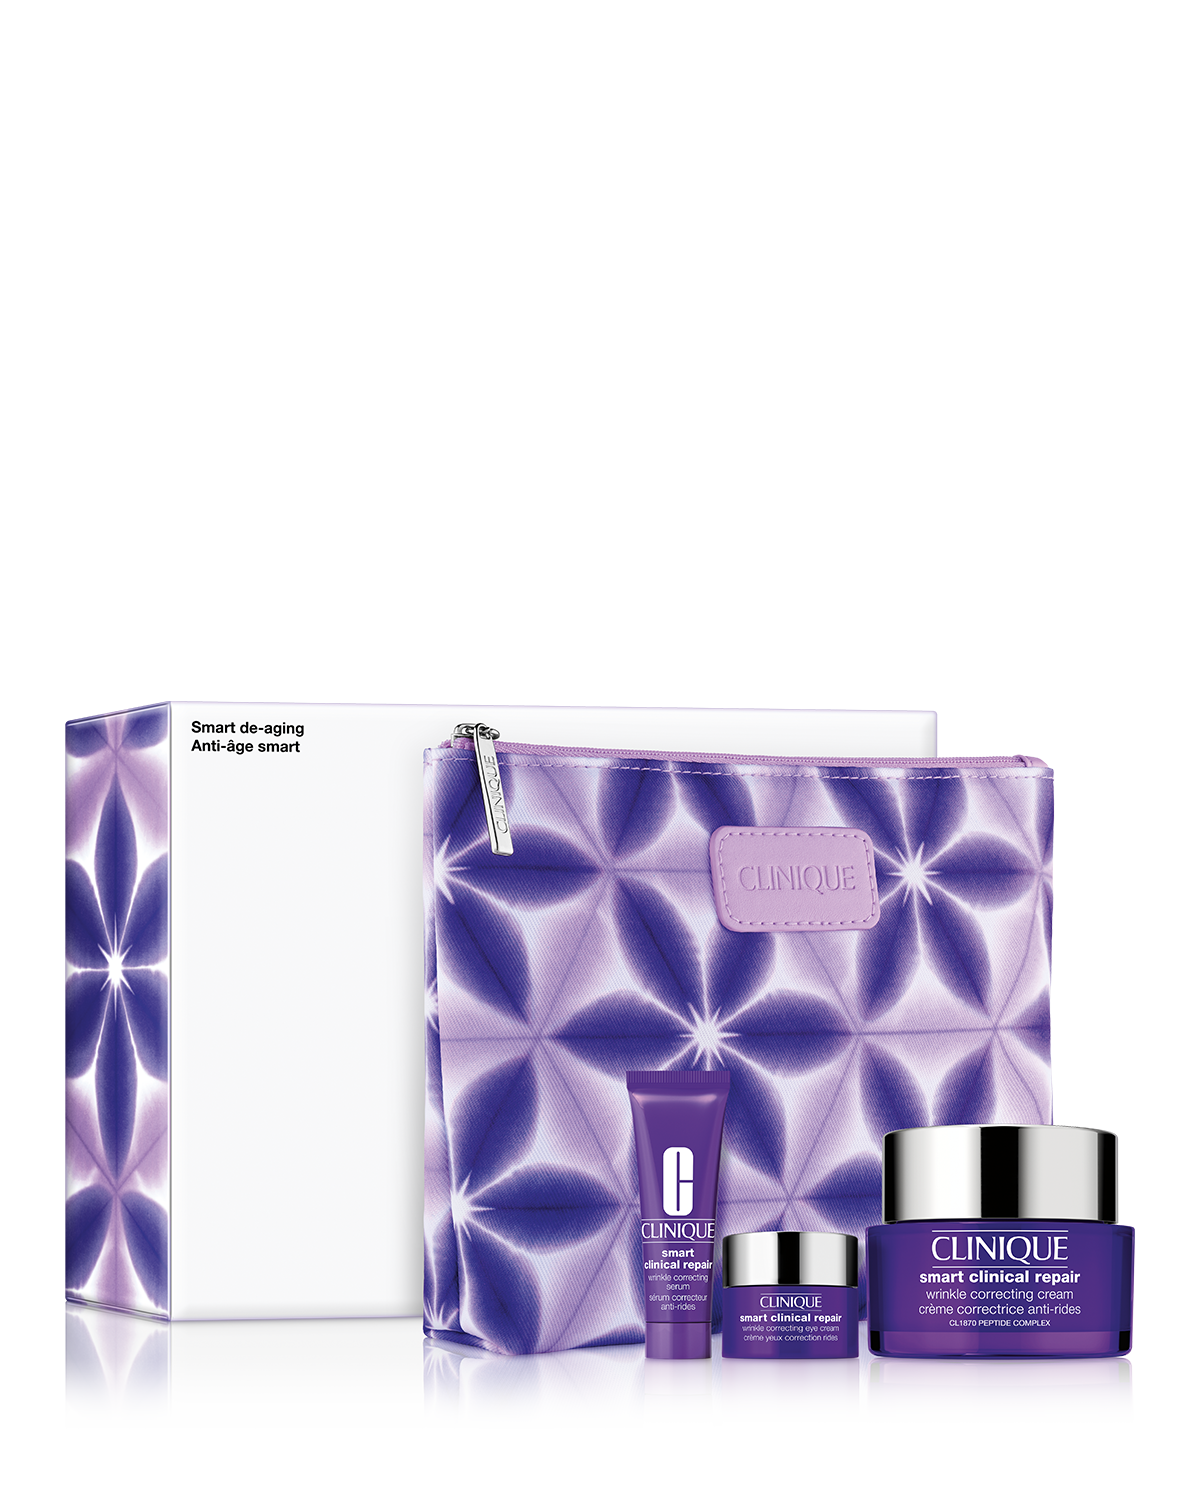 Smart Clinical Repair Wrinkle Correcting Set